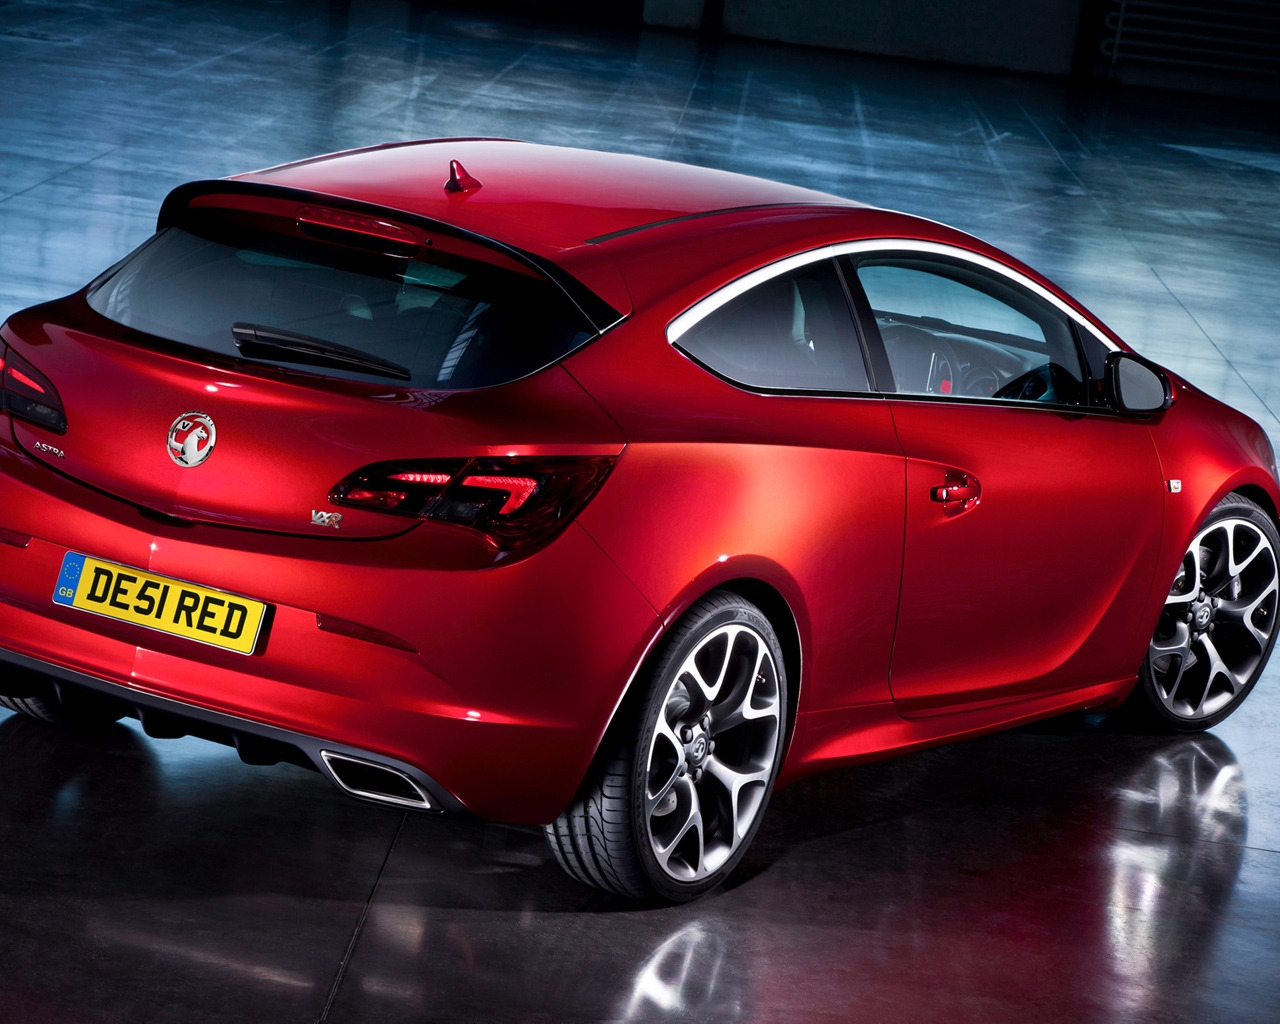 Vauxhall Astra GTC Rear for 1280 x 1024 resolution